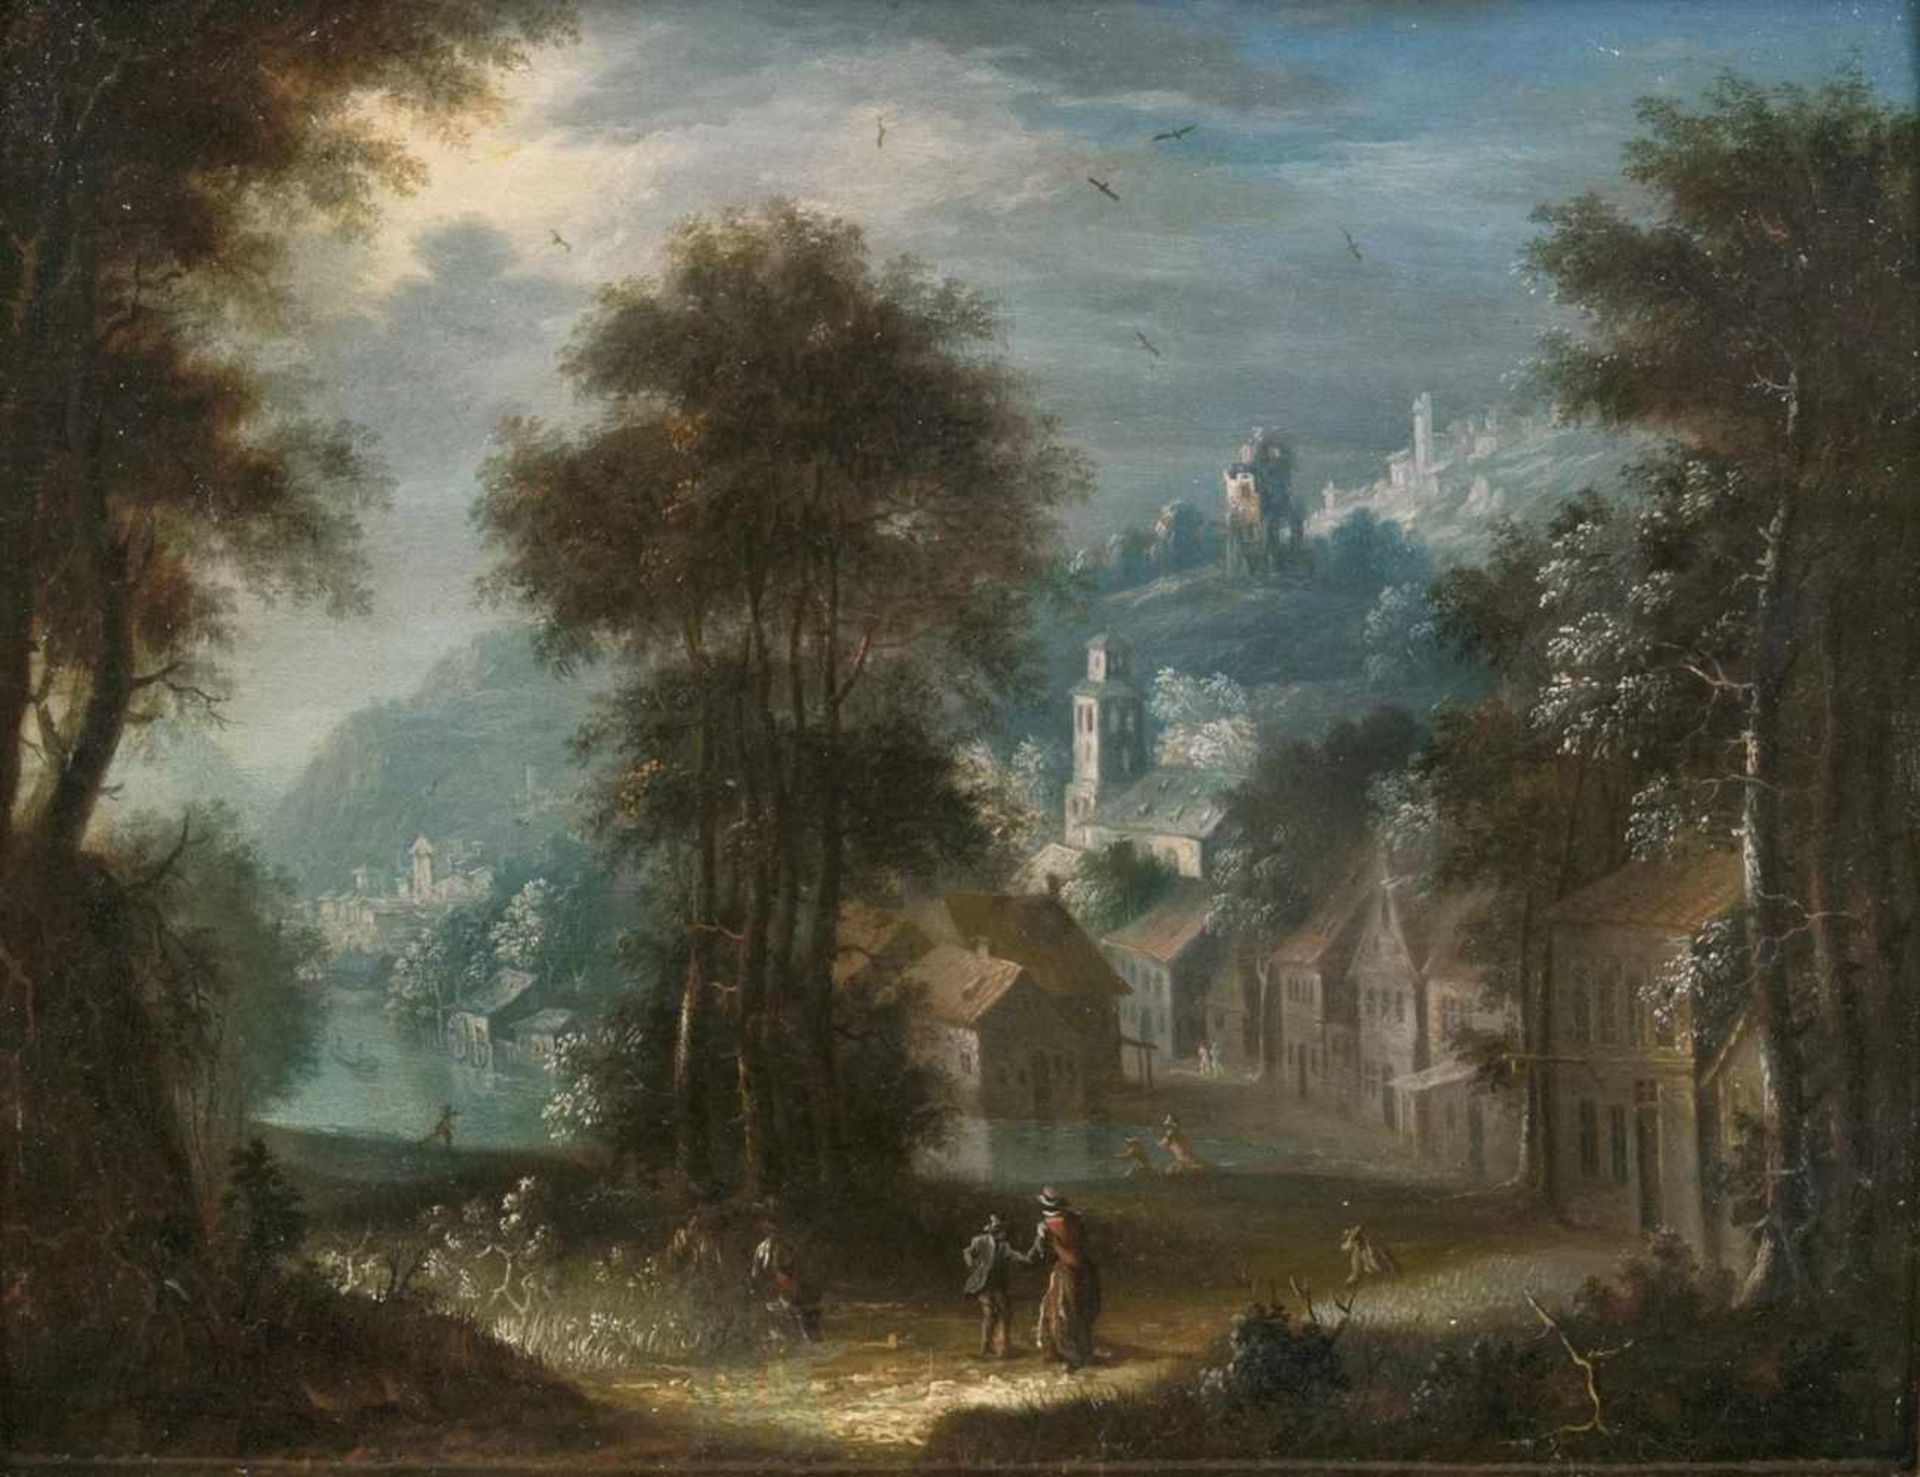 Flemish school17th cent.View of a Town in a River Valleyc. 1650, oil/wood, 27 x 35 cm, on the